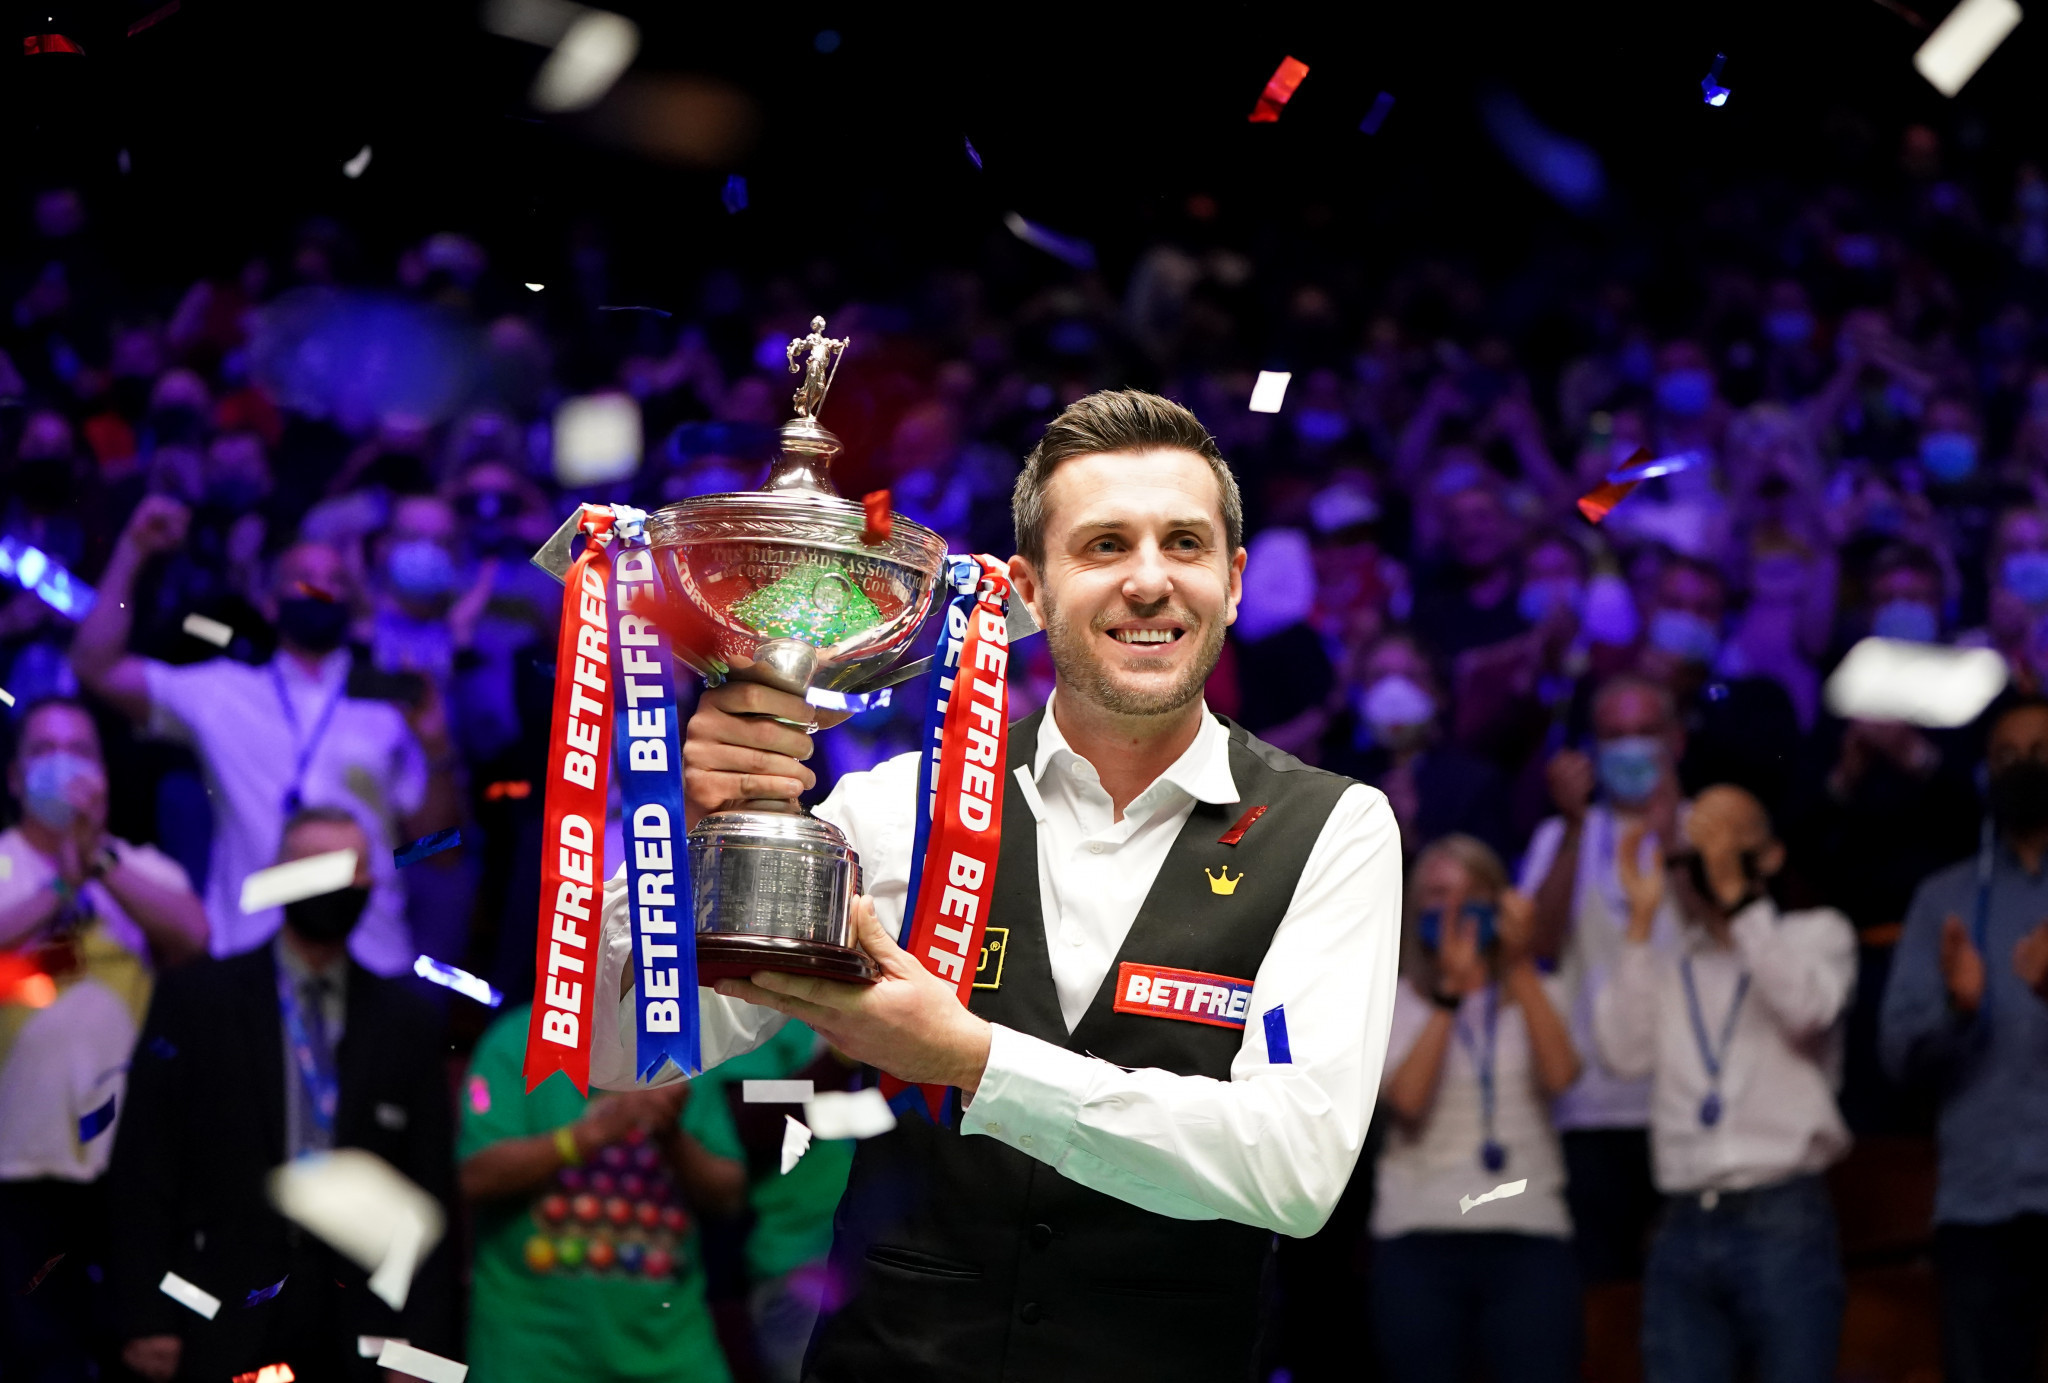 England's Mark Selby won last year's World Snooker Championship, where only the final had a capacity crowd ©Getty Images